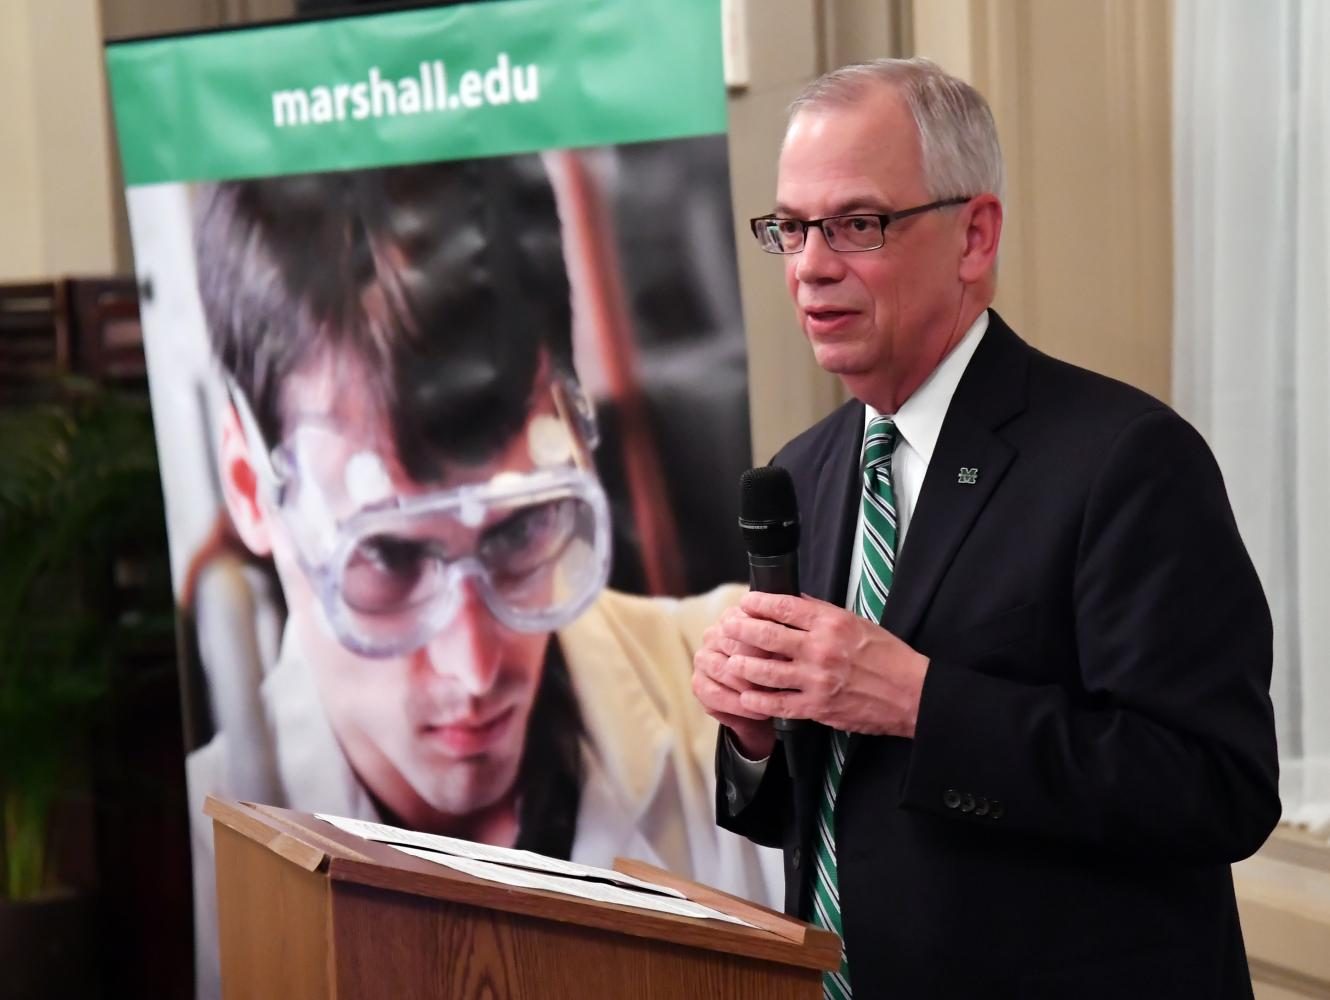 President Jerry Gilbert discusses university objectives and new marketing campaign at  April reception in honor of John Marshall in Richmond, VA.